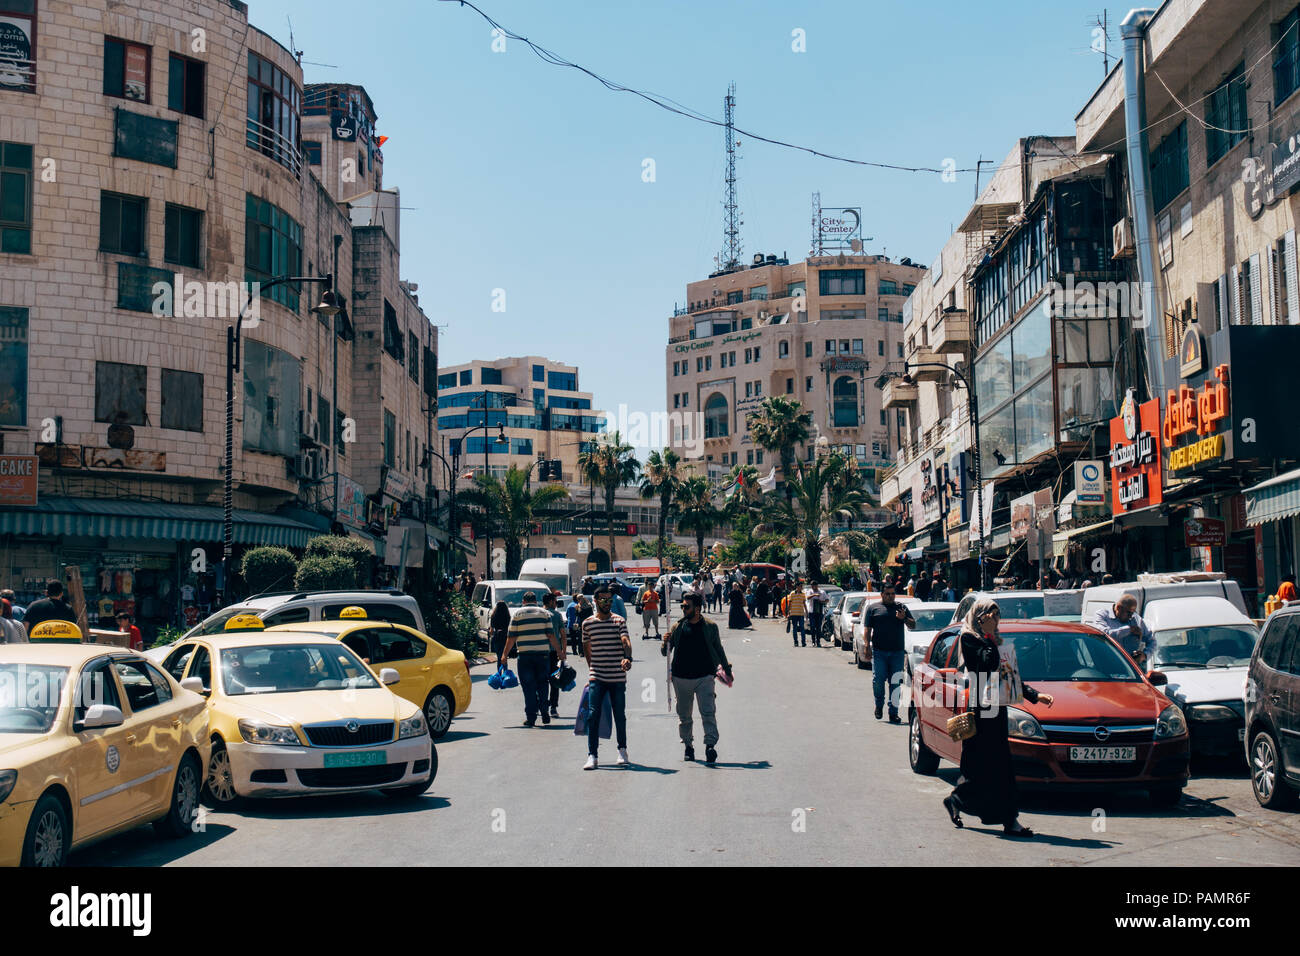 busy streets packed with taxis and people during an afternoon in Ramallah, Palestine's capital city and administrative centre Stock Photo